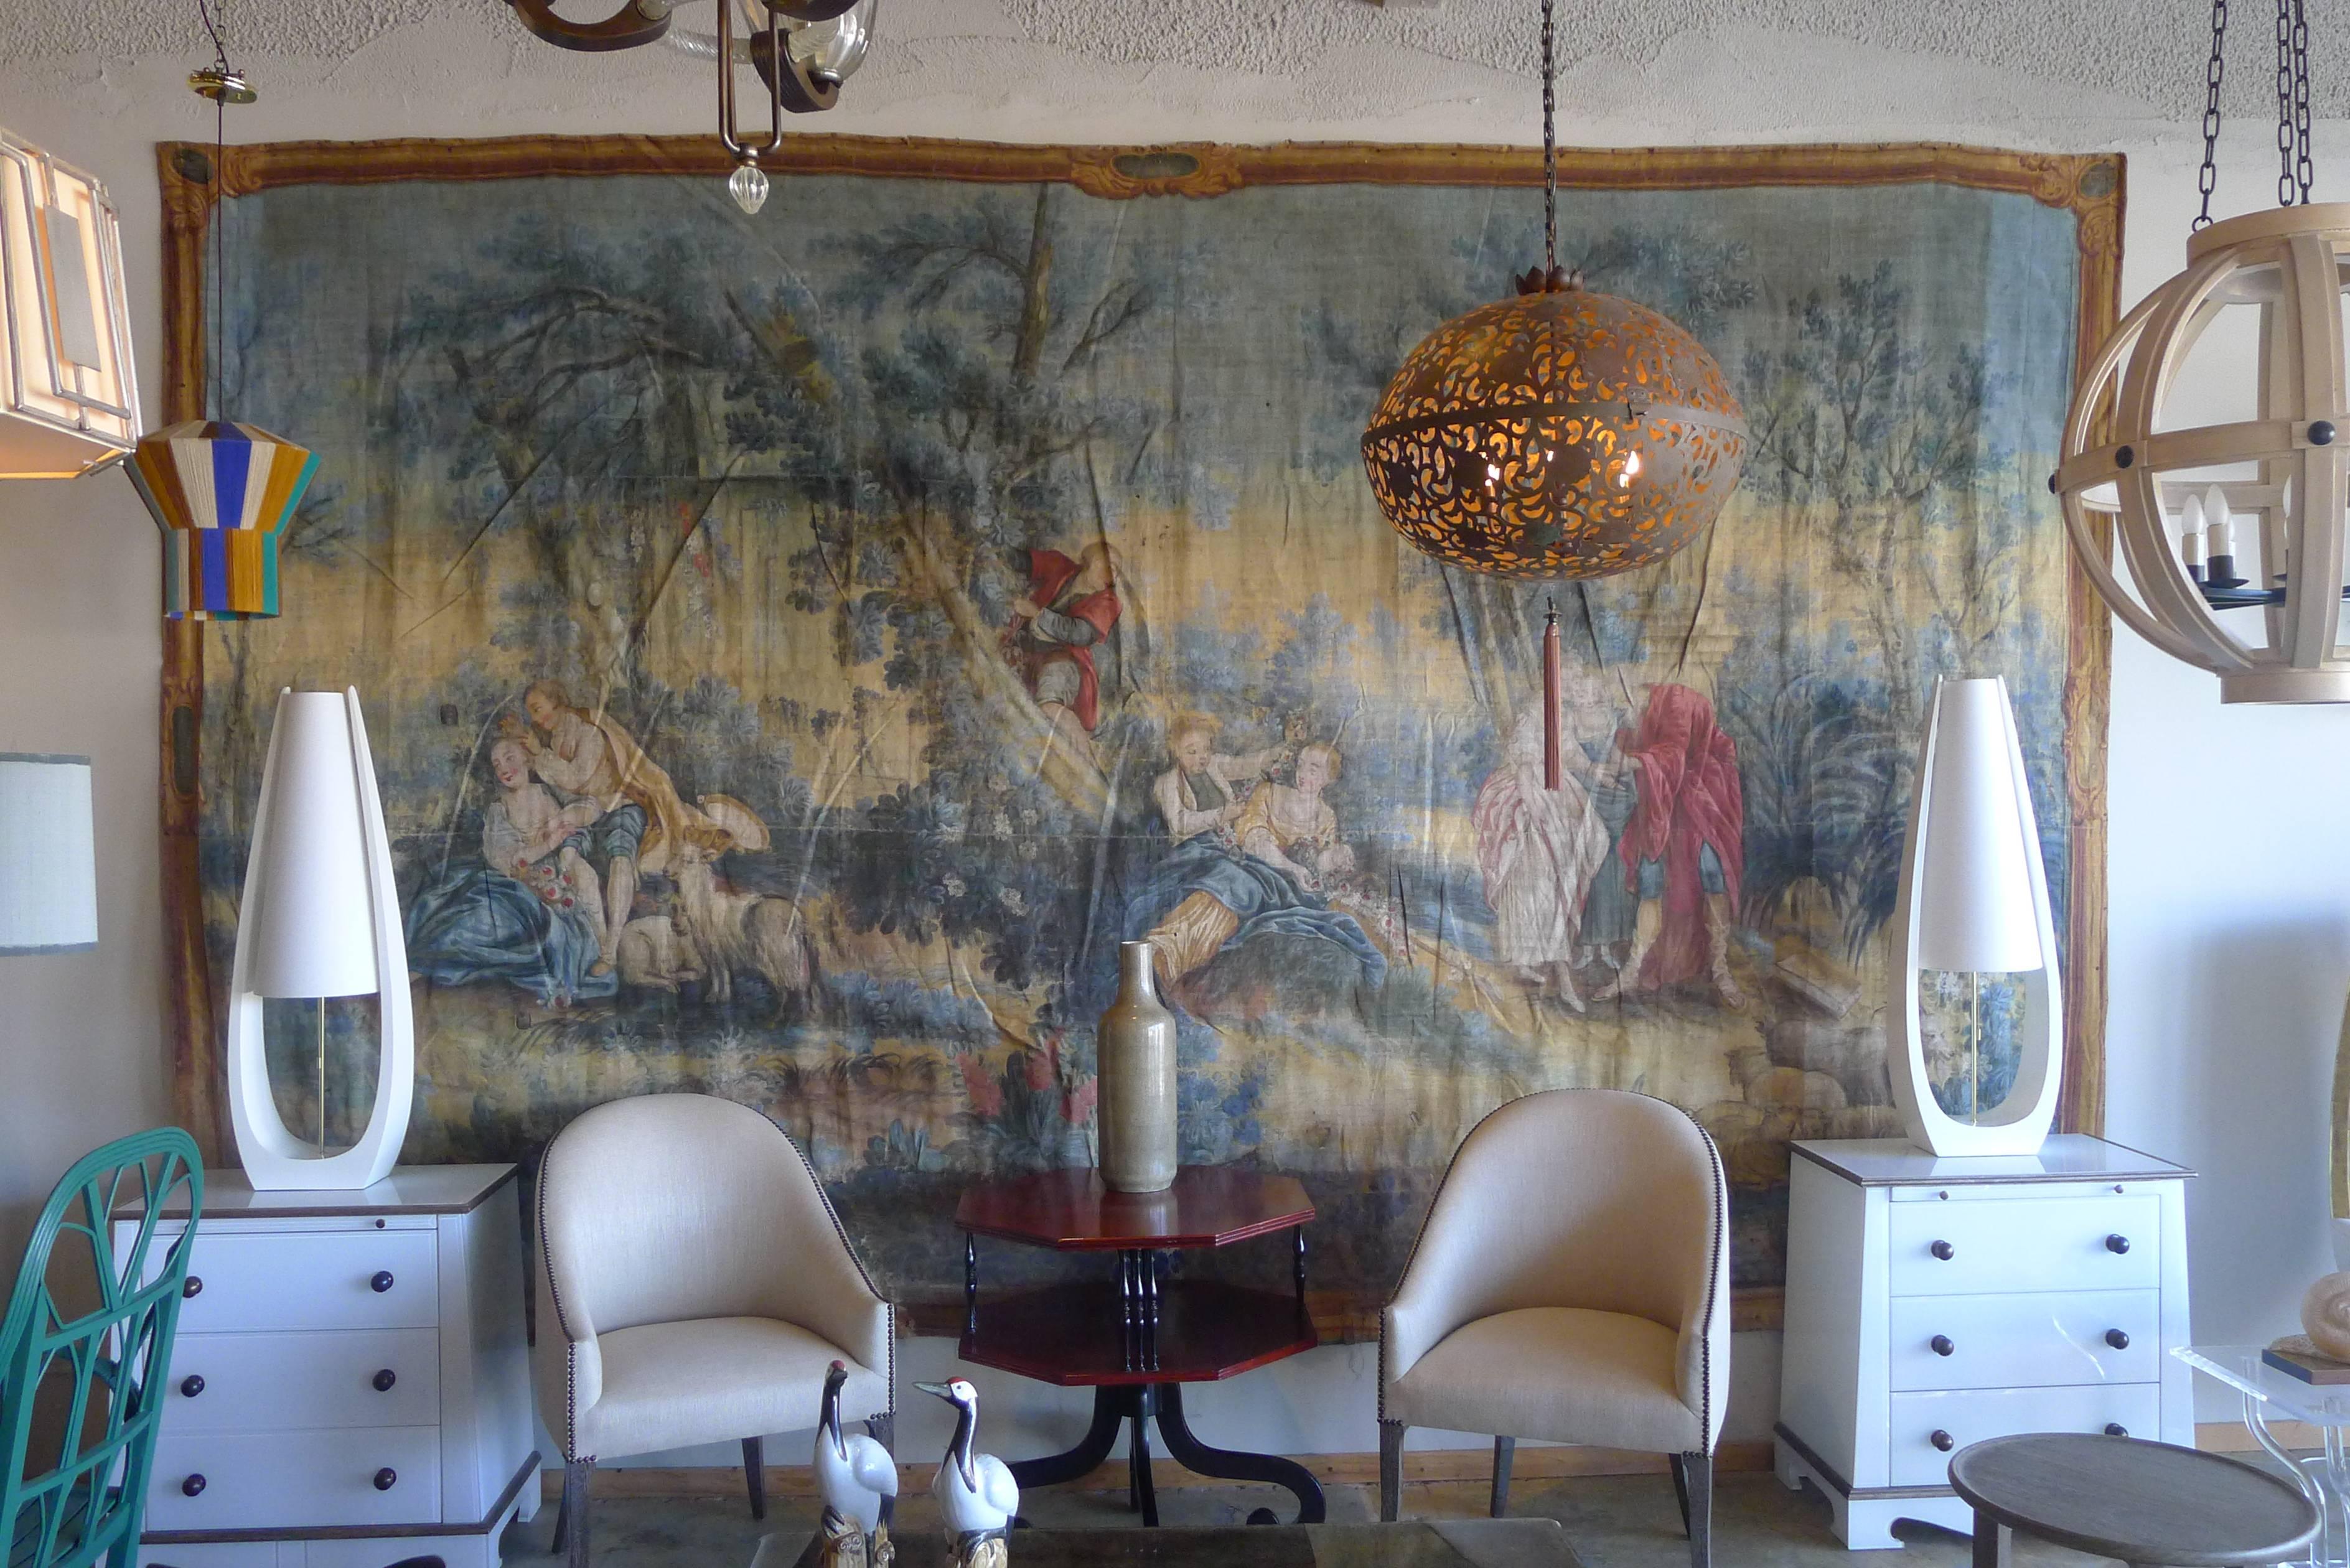 Monumental 14-foot wide Rococo pastoral fete galante painting from the mid-18th century. This is in the tapestry style, and is oil painting on un-stretched canvas. The canvas was stretched out to create the large size.

See all photos. Canvas has